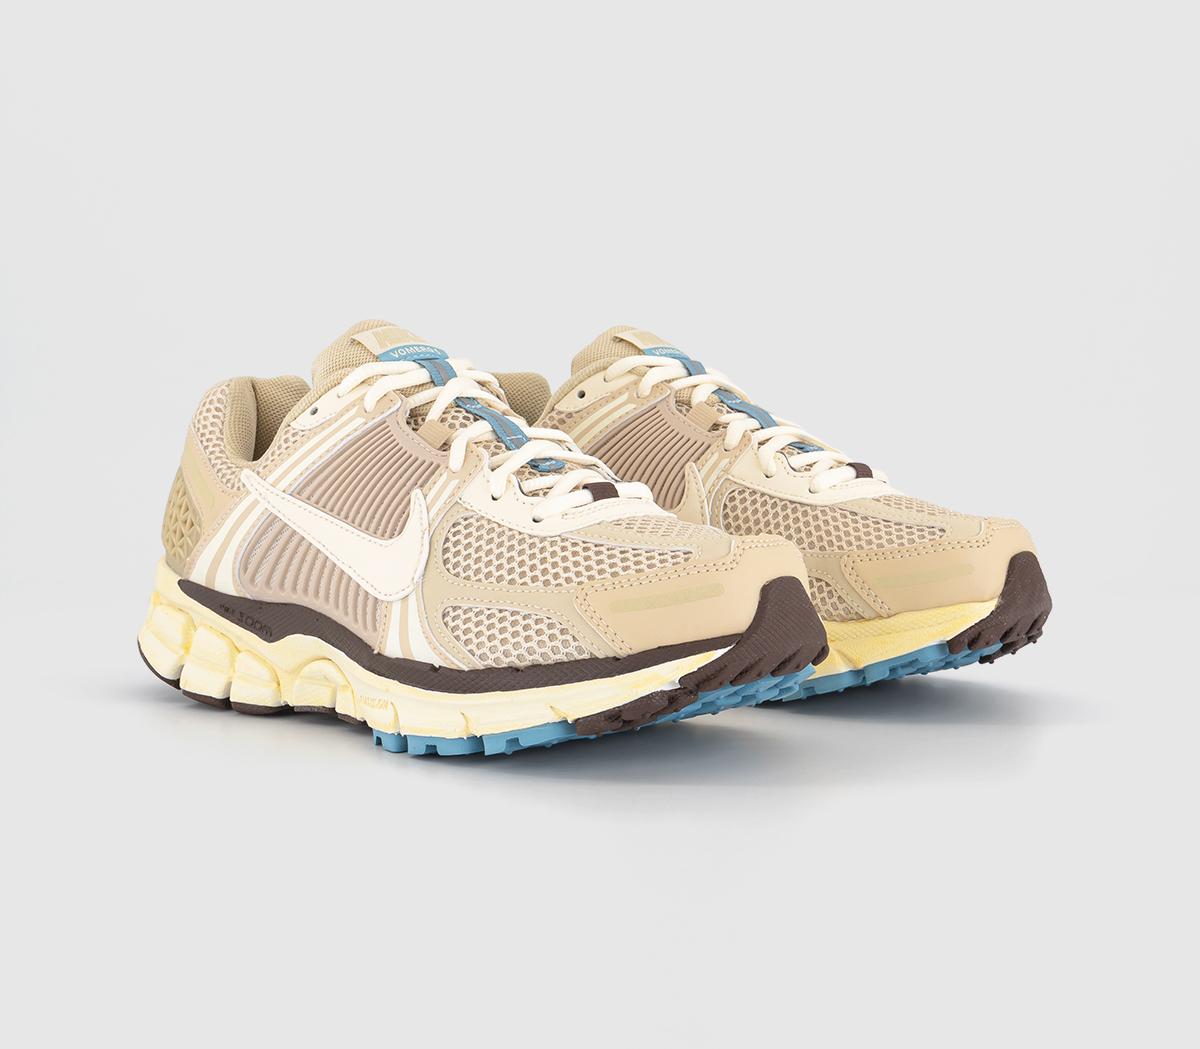 Nike Womens Zoom Vomero 5 Trainers Oatmeal Pale Ivory Sail Light Chocolate Worn Blue Natural, 6